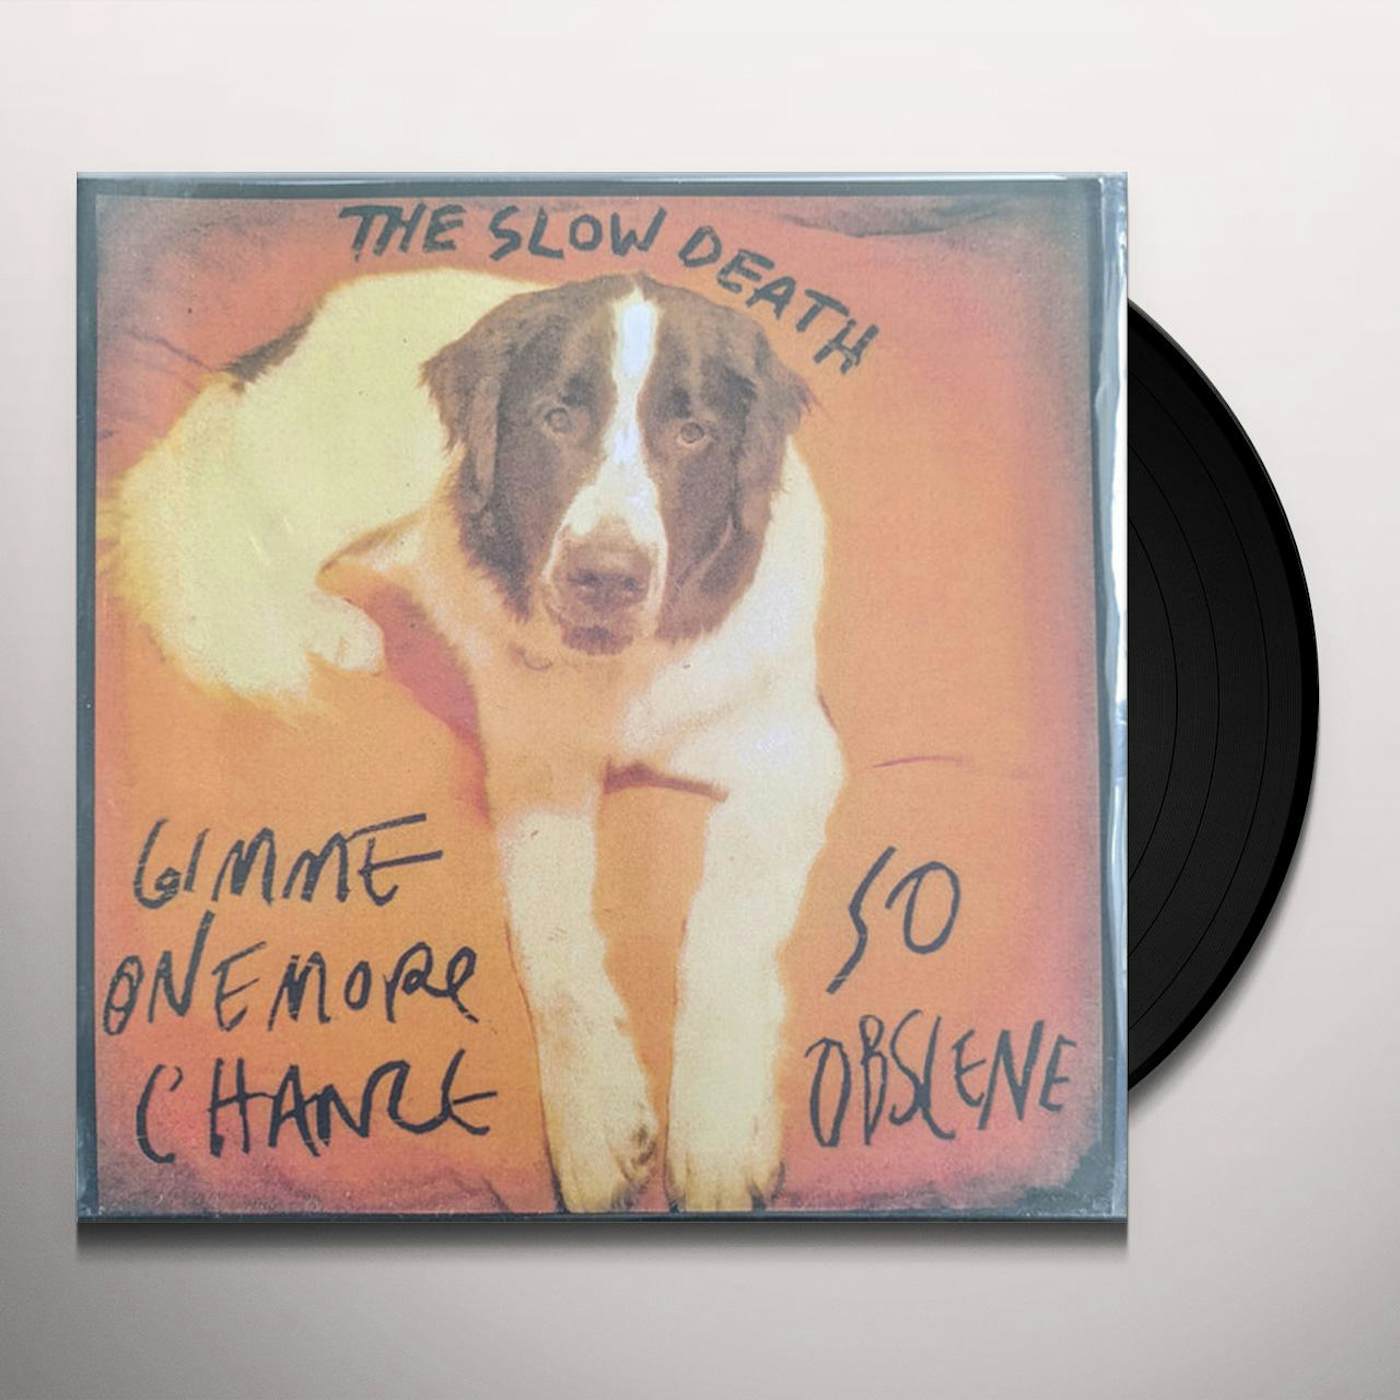 The Slow Death Gimme One More Chance / So Obscene Vinyl Record